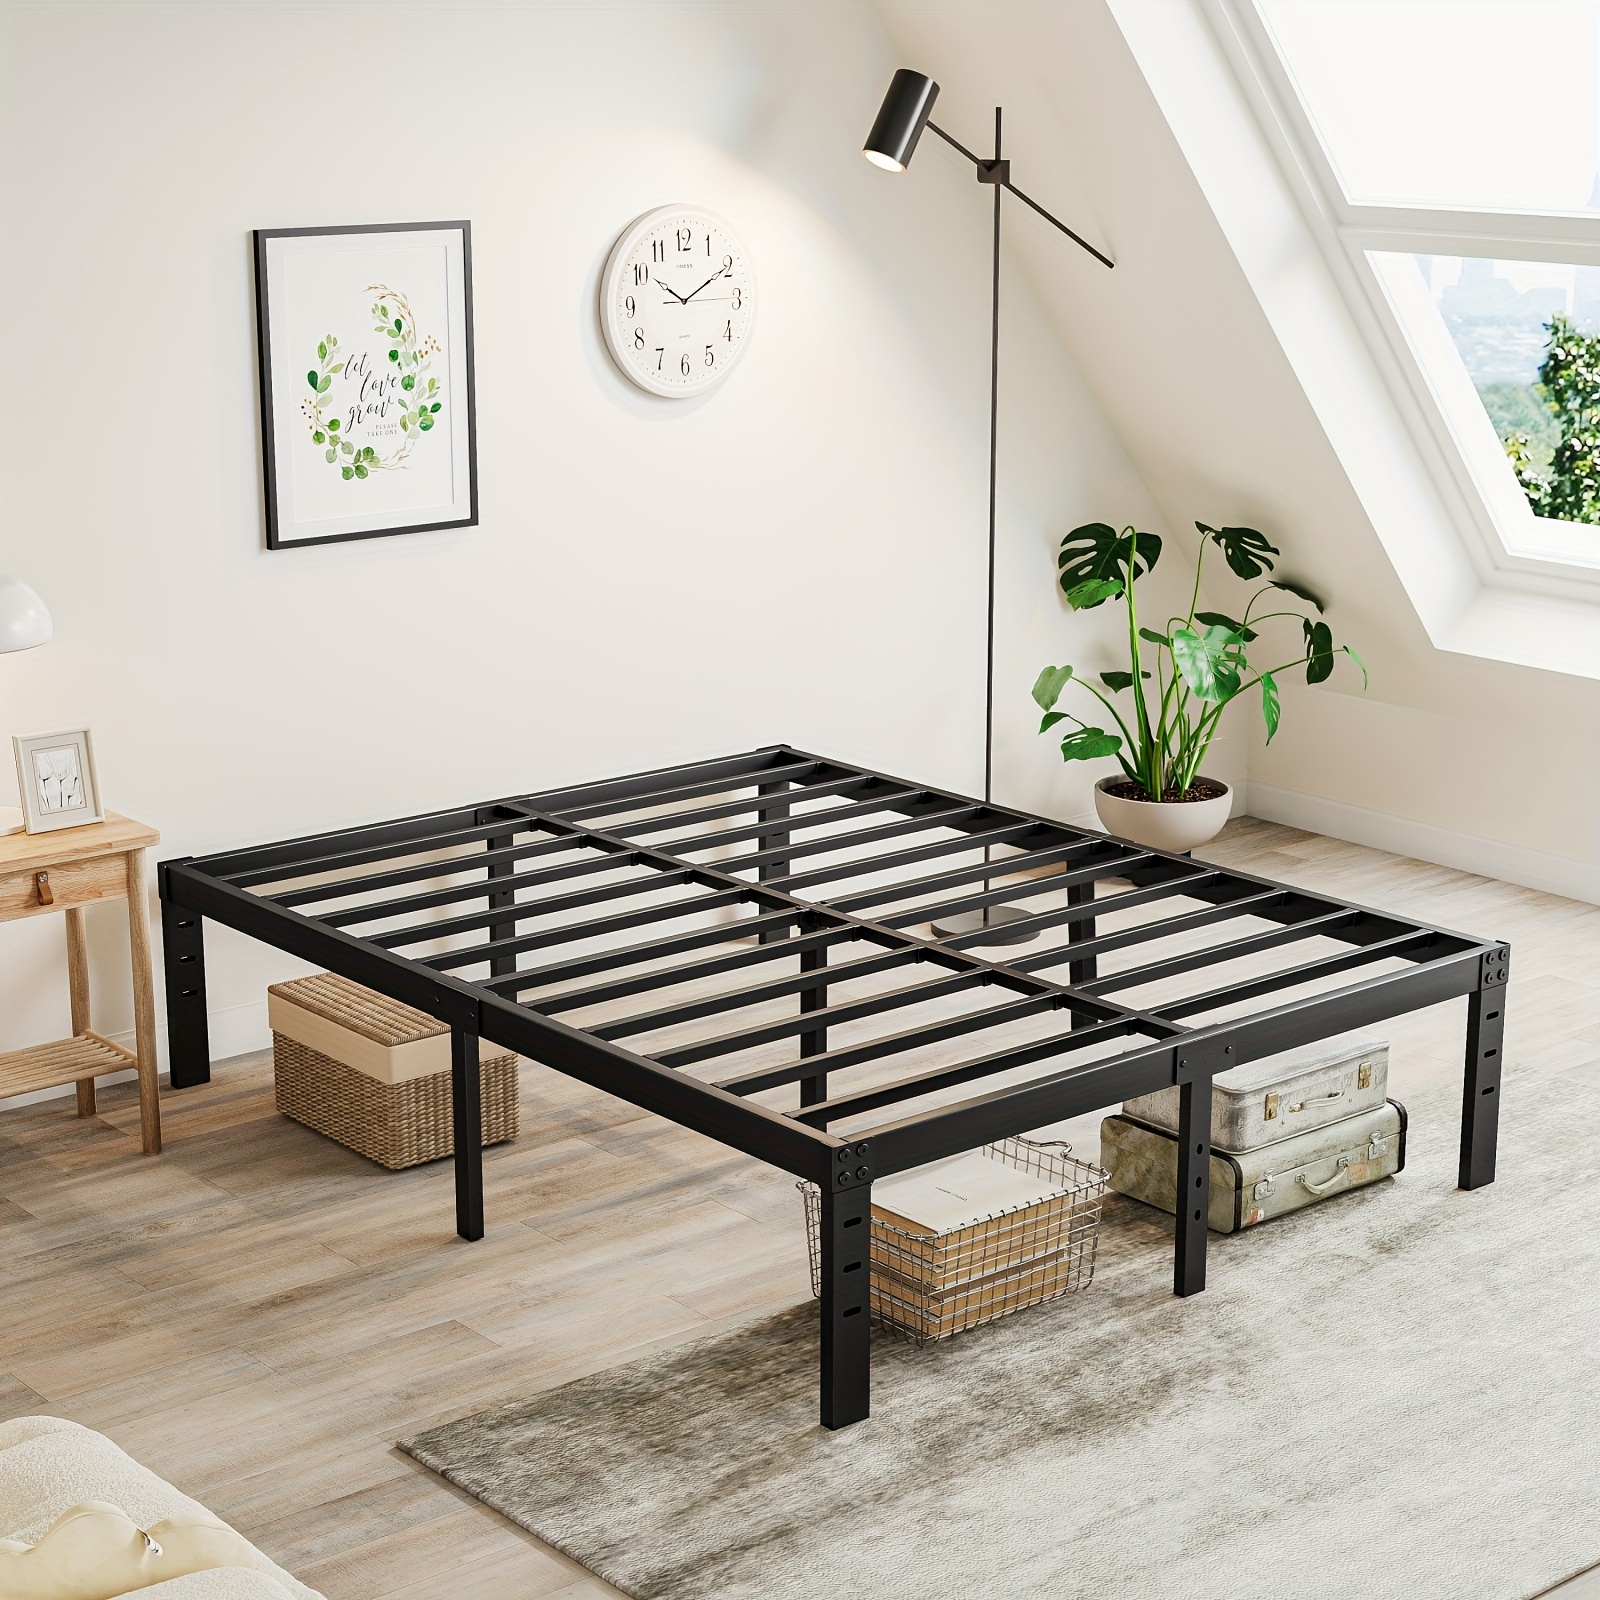 

1pc Thicker Metal Platform Bed Frame 18 Inch High, Heavy Duty Steel Slats With 3000lbs Support, No Box Spring Needed, Anti-slip, Easy Assembly, Black